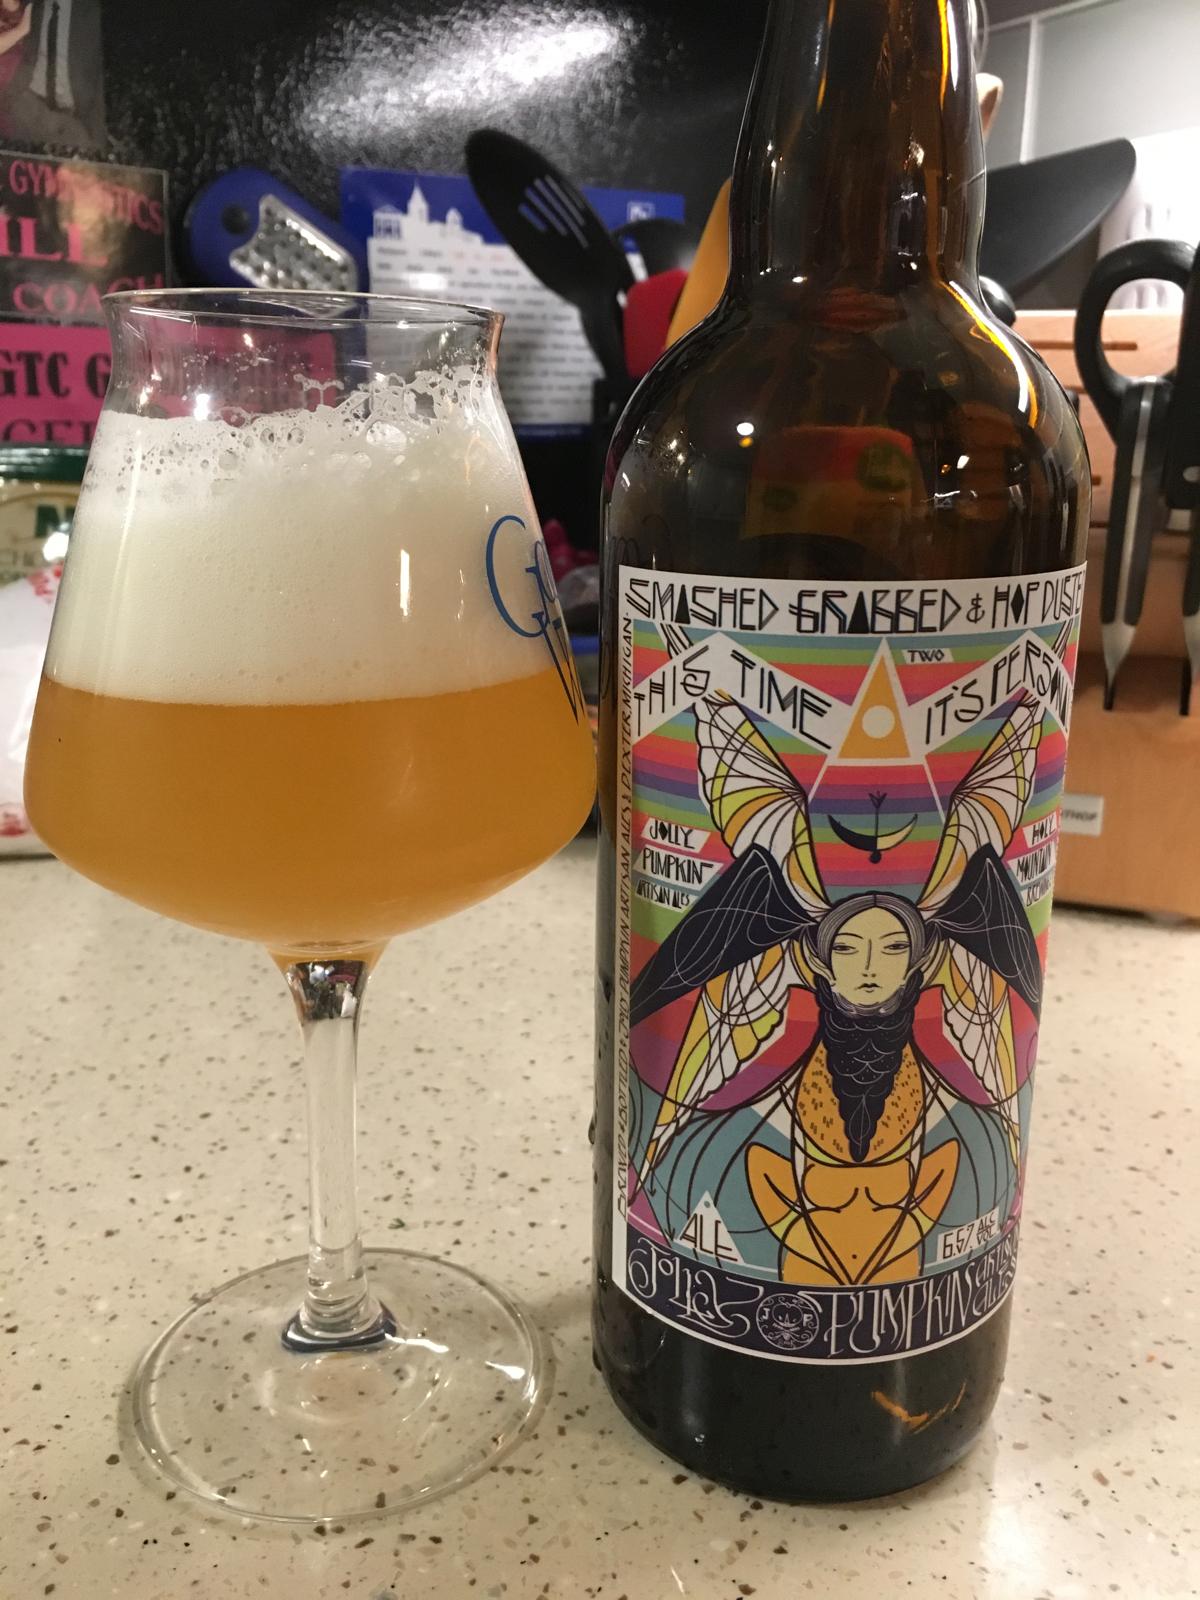 Smashed, Grabbed & Hop Dusted 2: This Time Its Personal